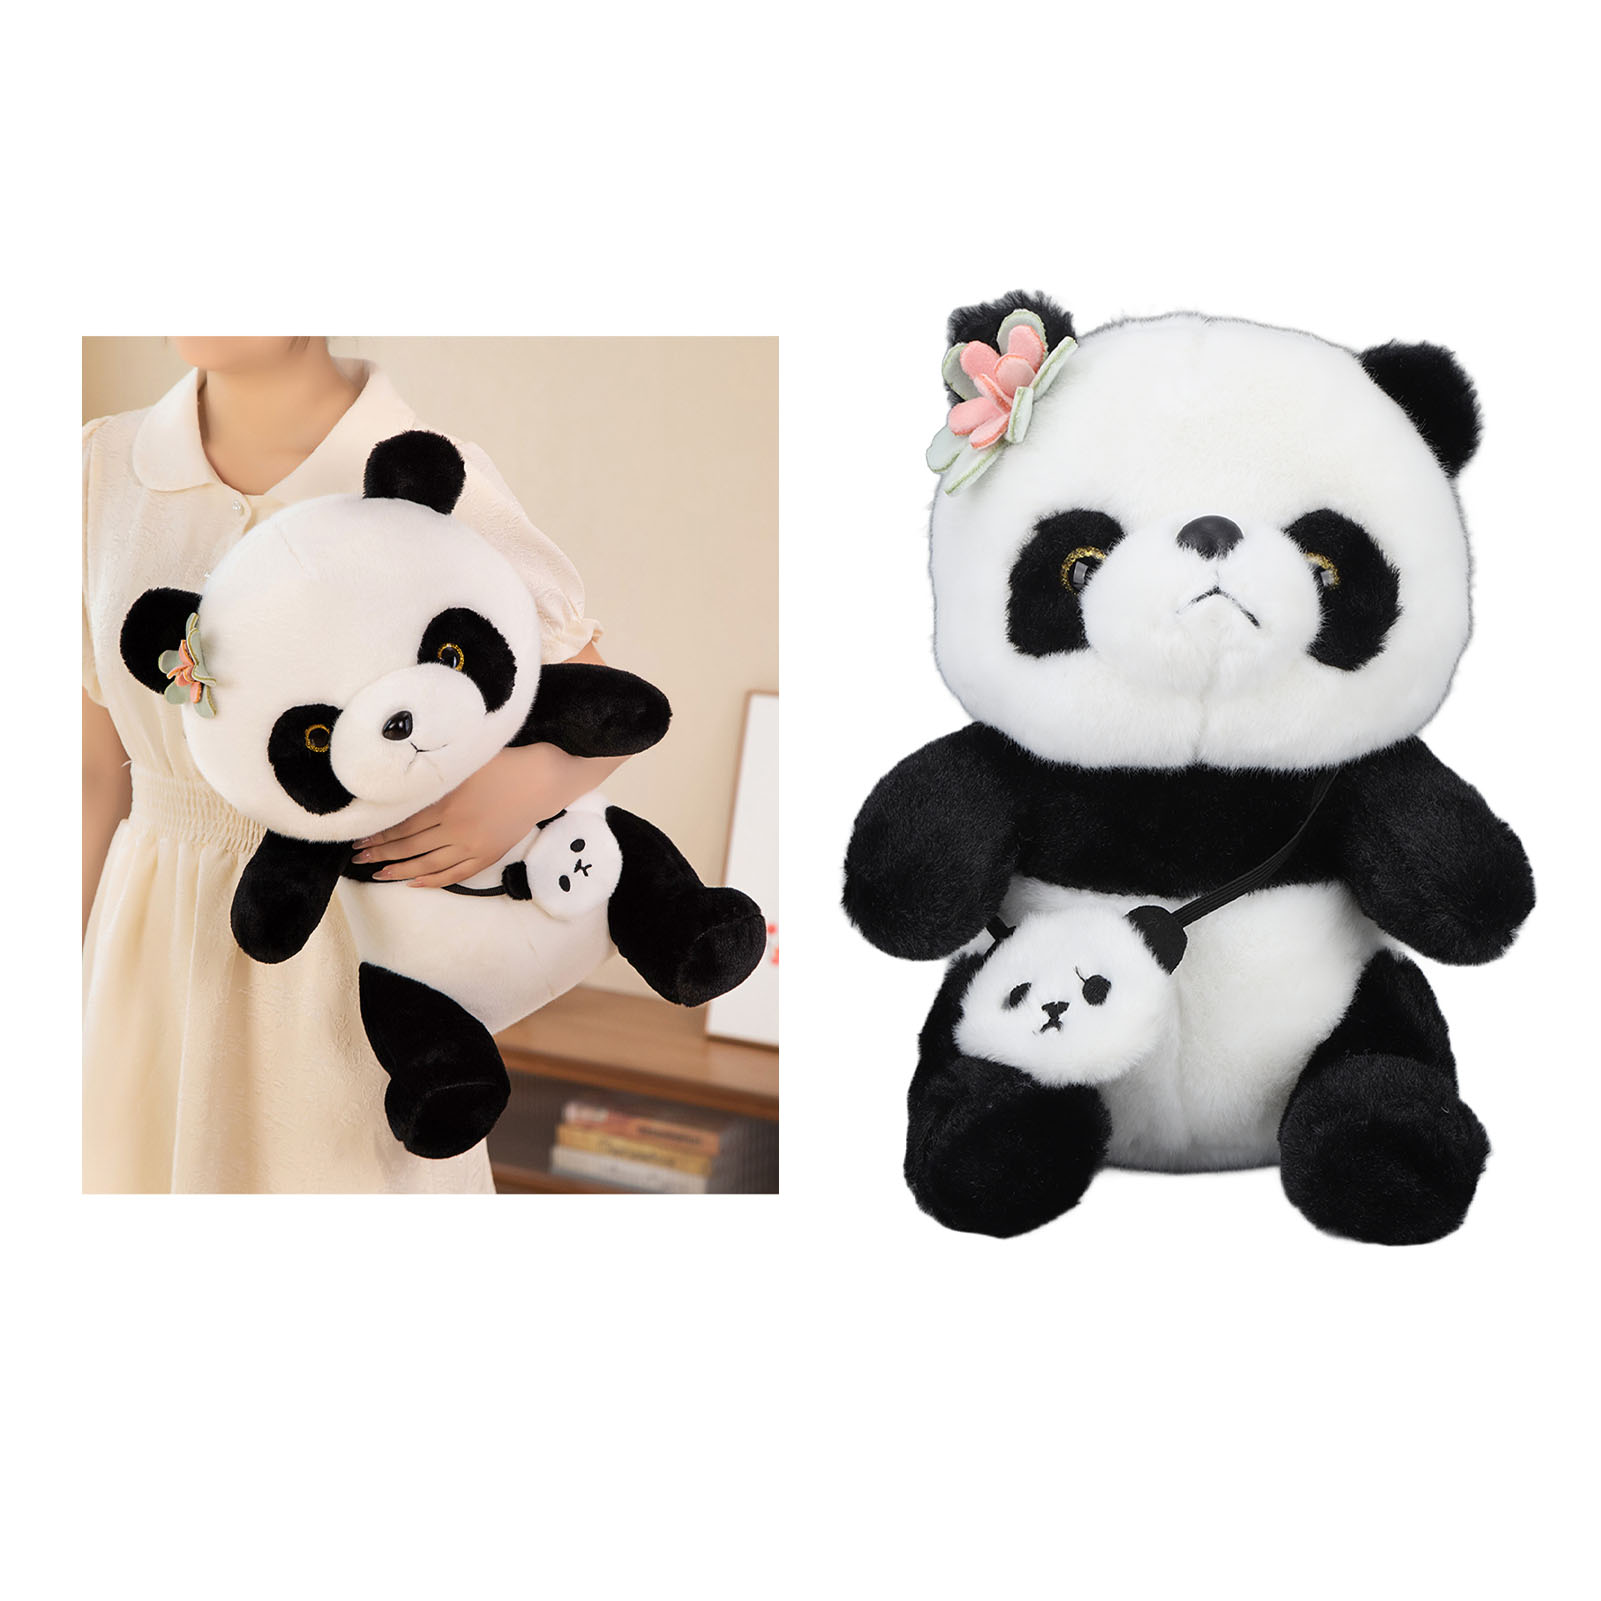 Cute Panda Plush Stuffed Doll Toy With Flower Decoration Soft And ...